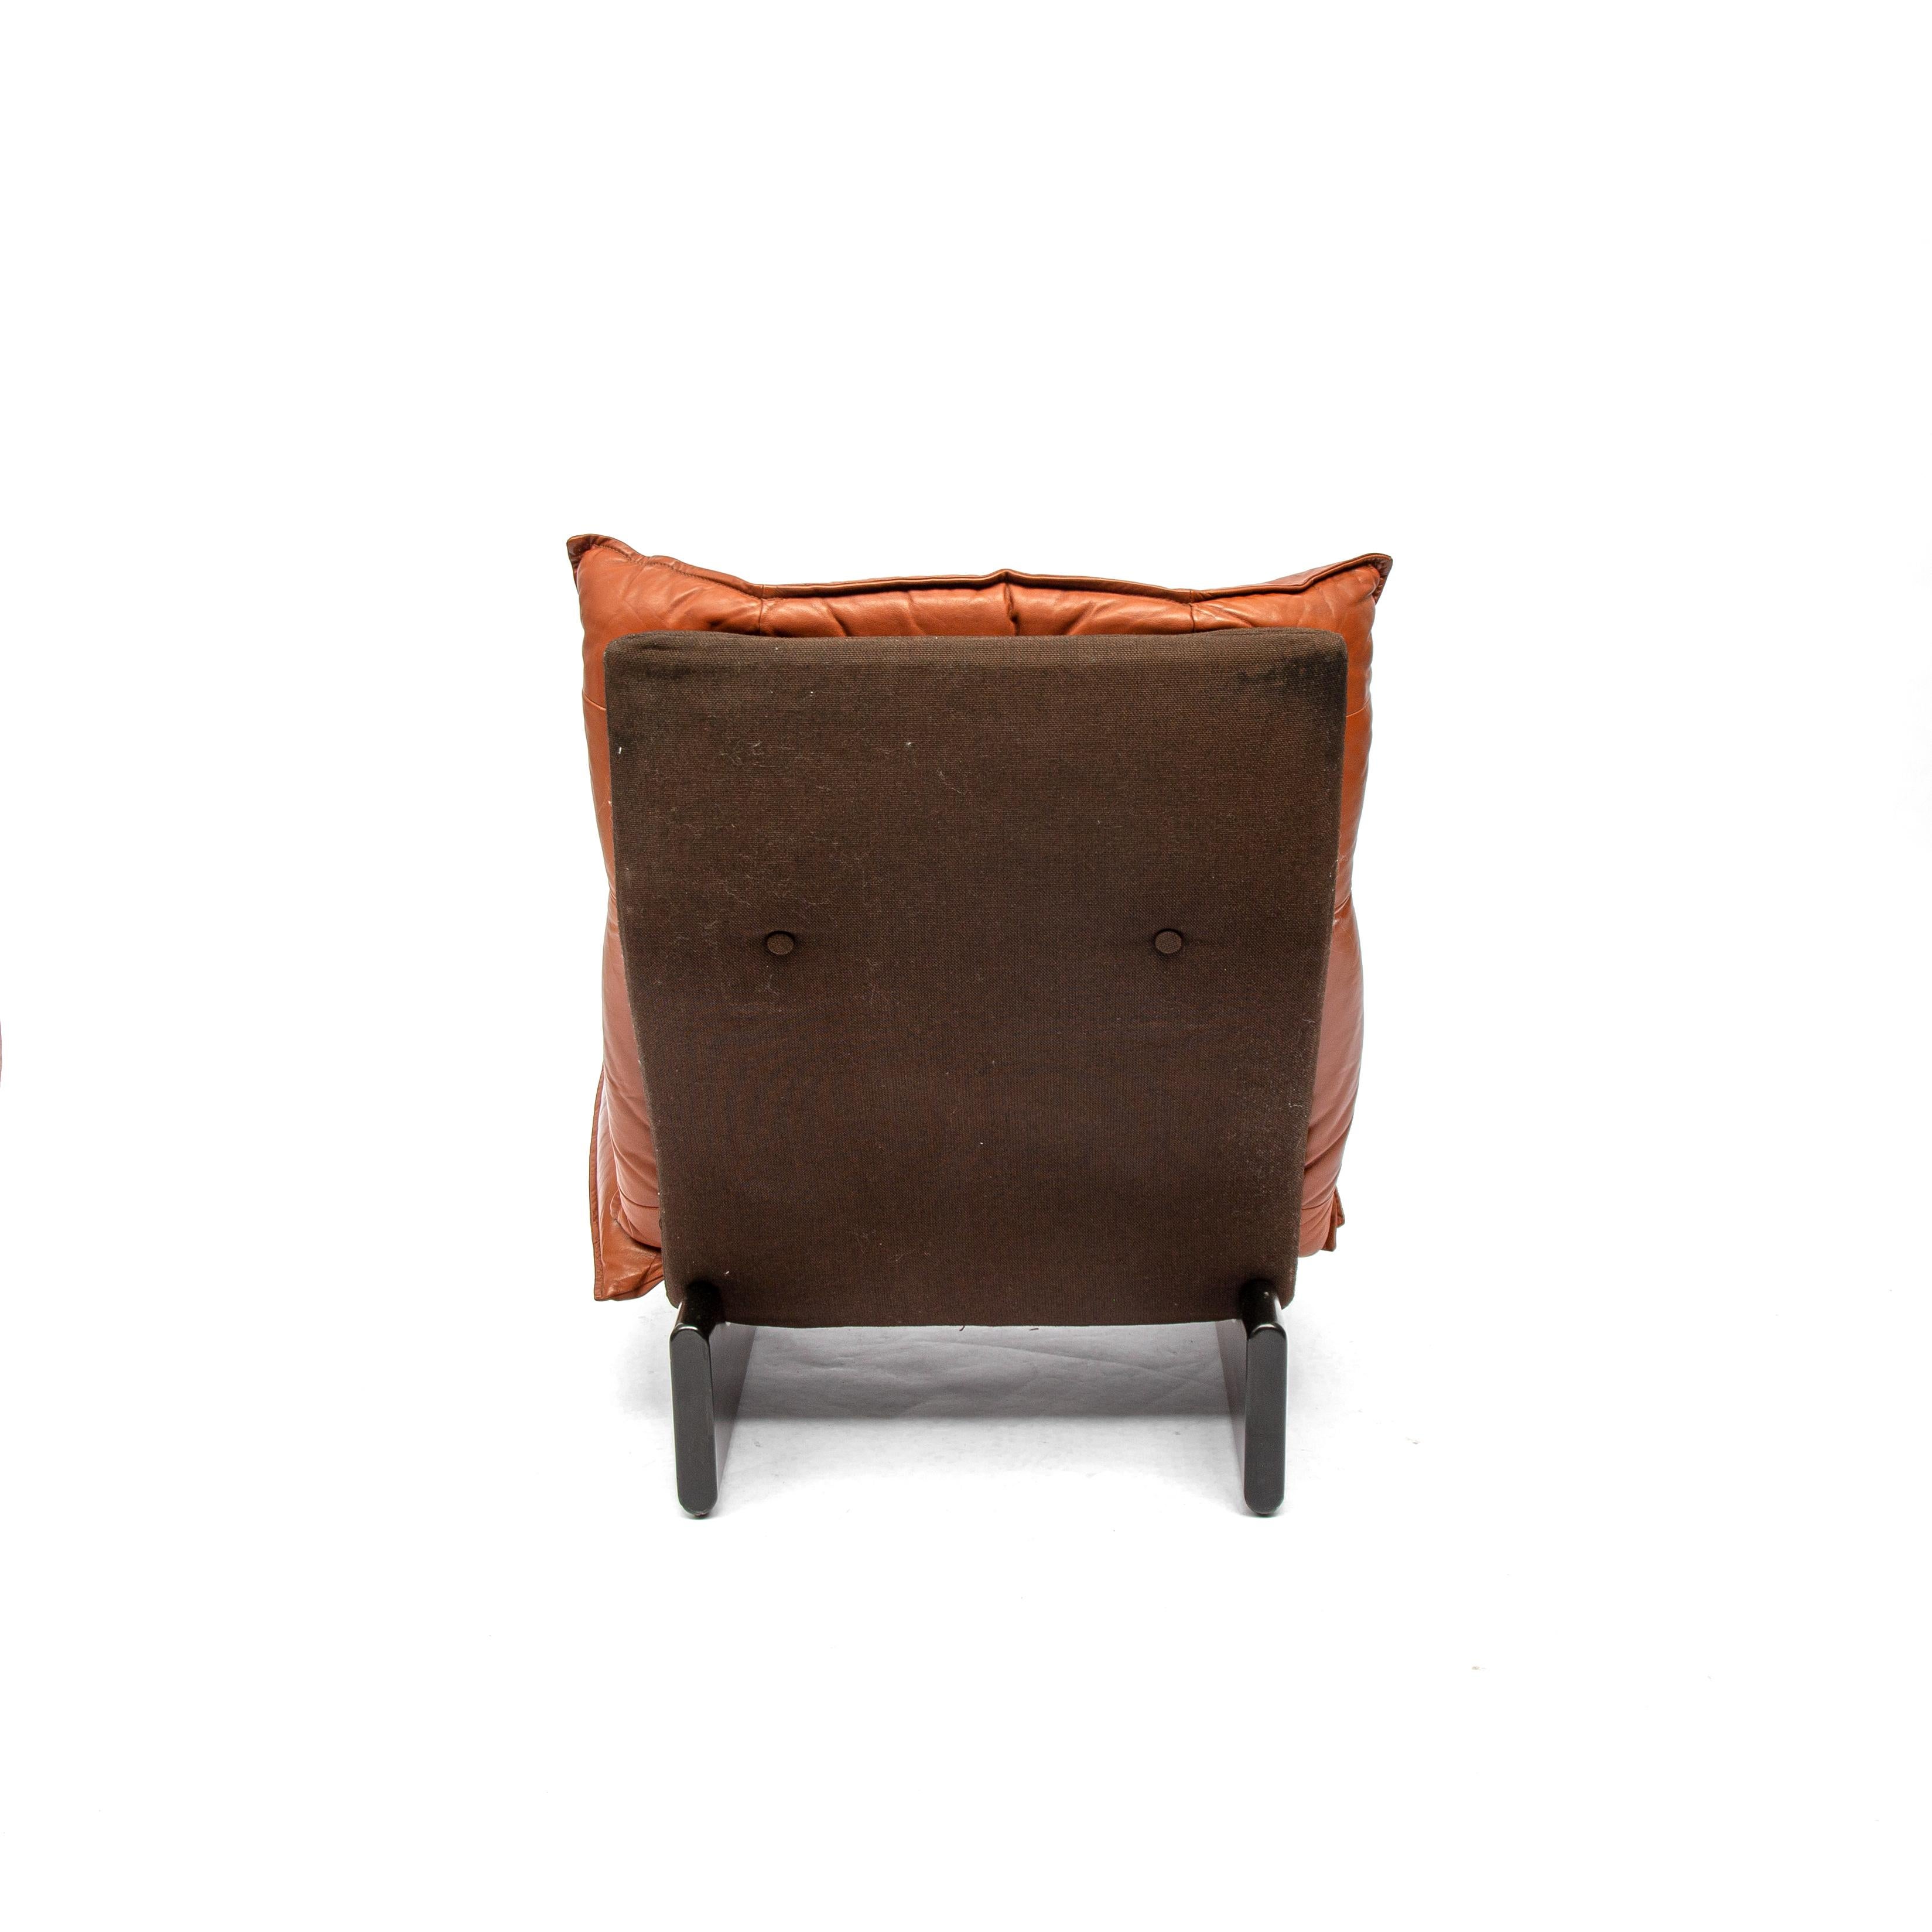 Late 20th Century Cognac Leolux Leather And Wood Lounge Chair, Dutch Modern, 1970s